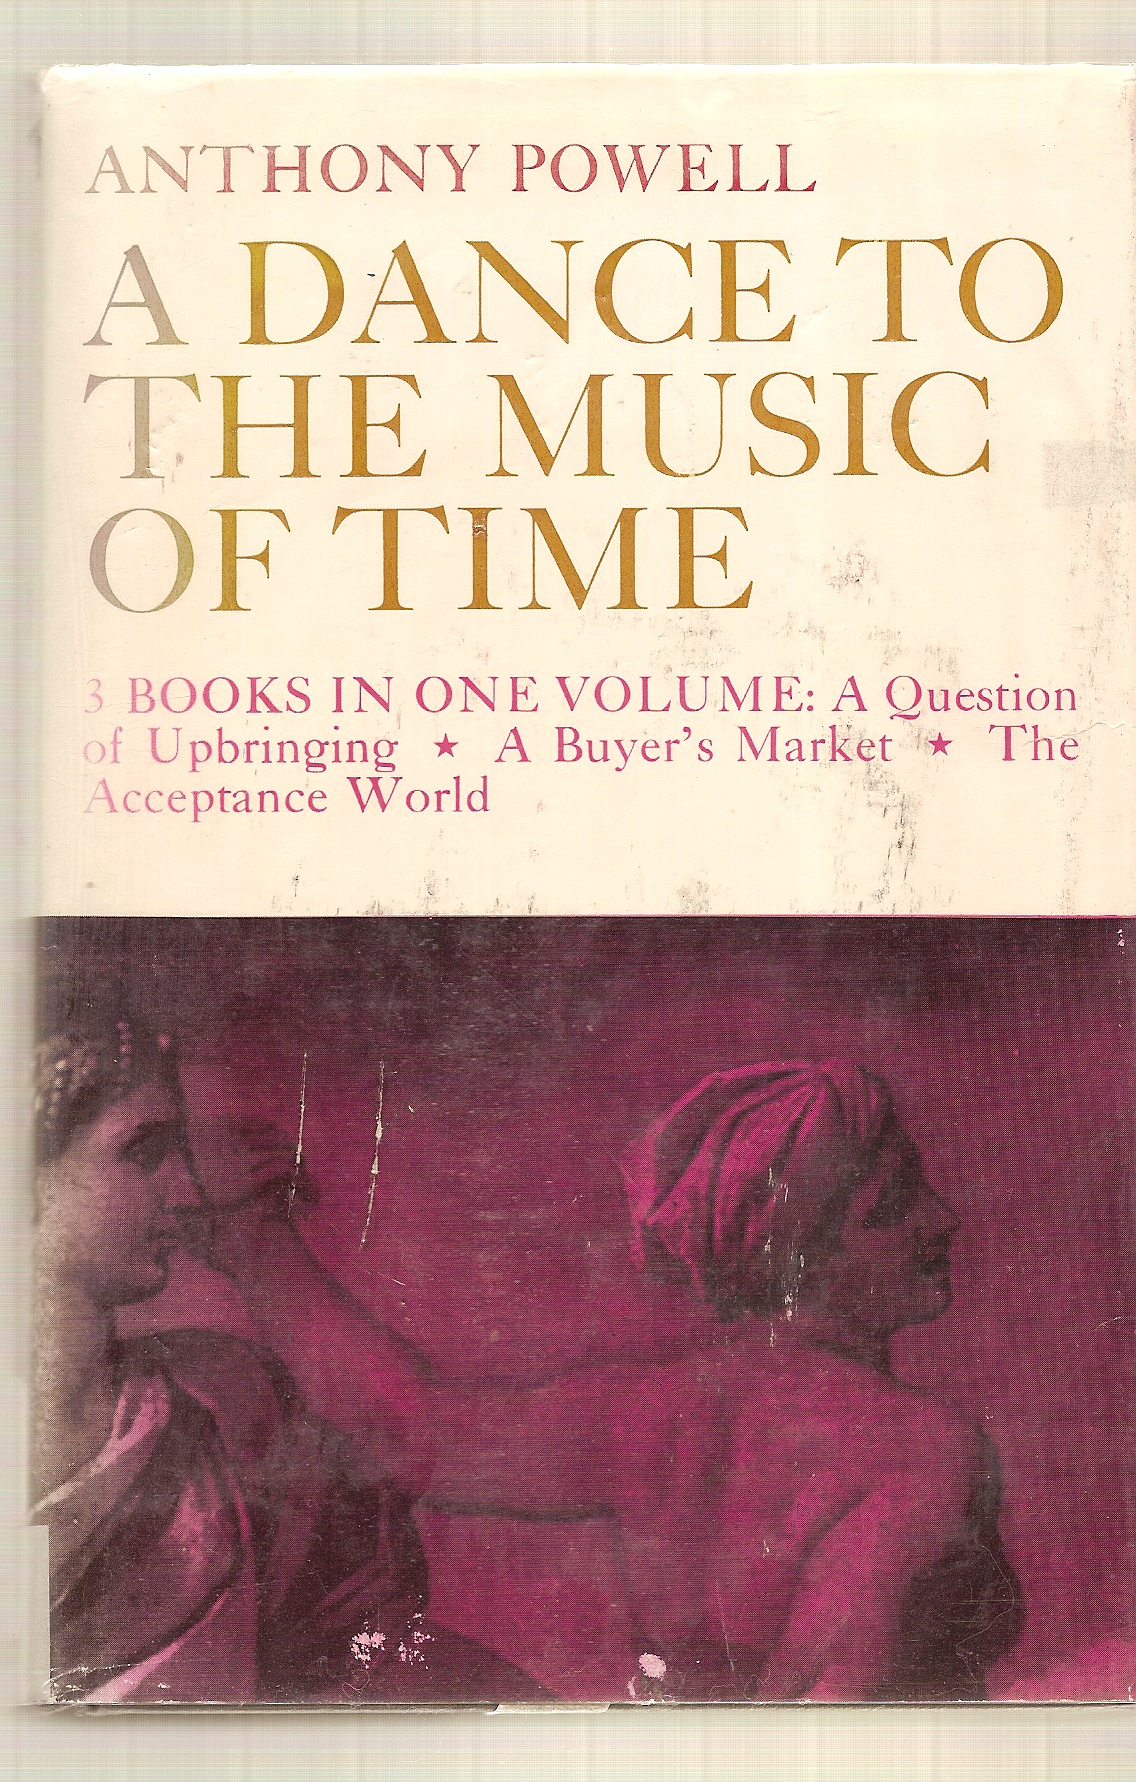 POWELL ANTHONY - A Dance to the Music of Time (3 Books in One) a Question of Upbringing, a Buyer's Market, the Acceptance World